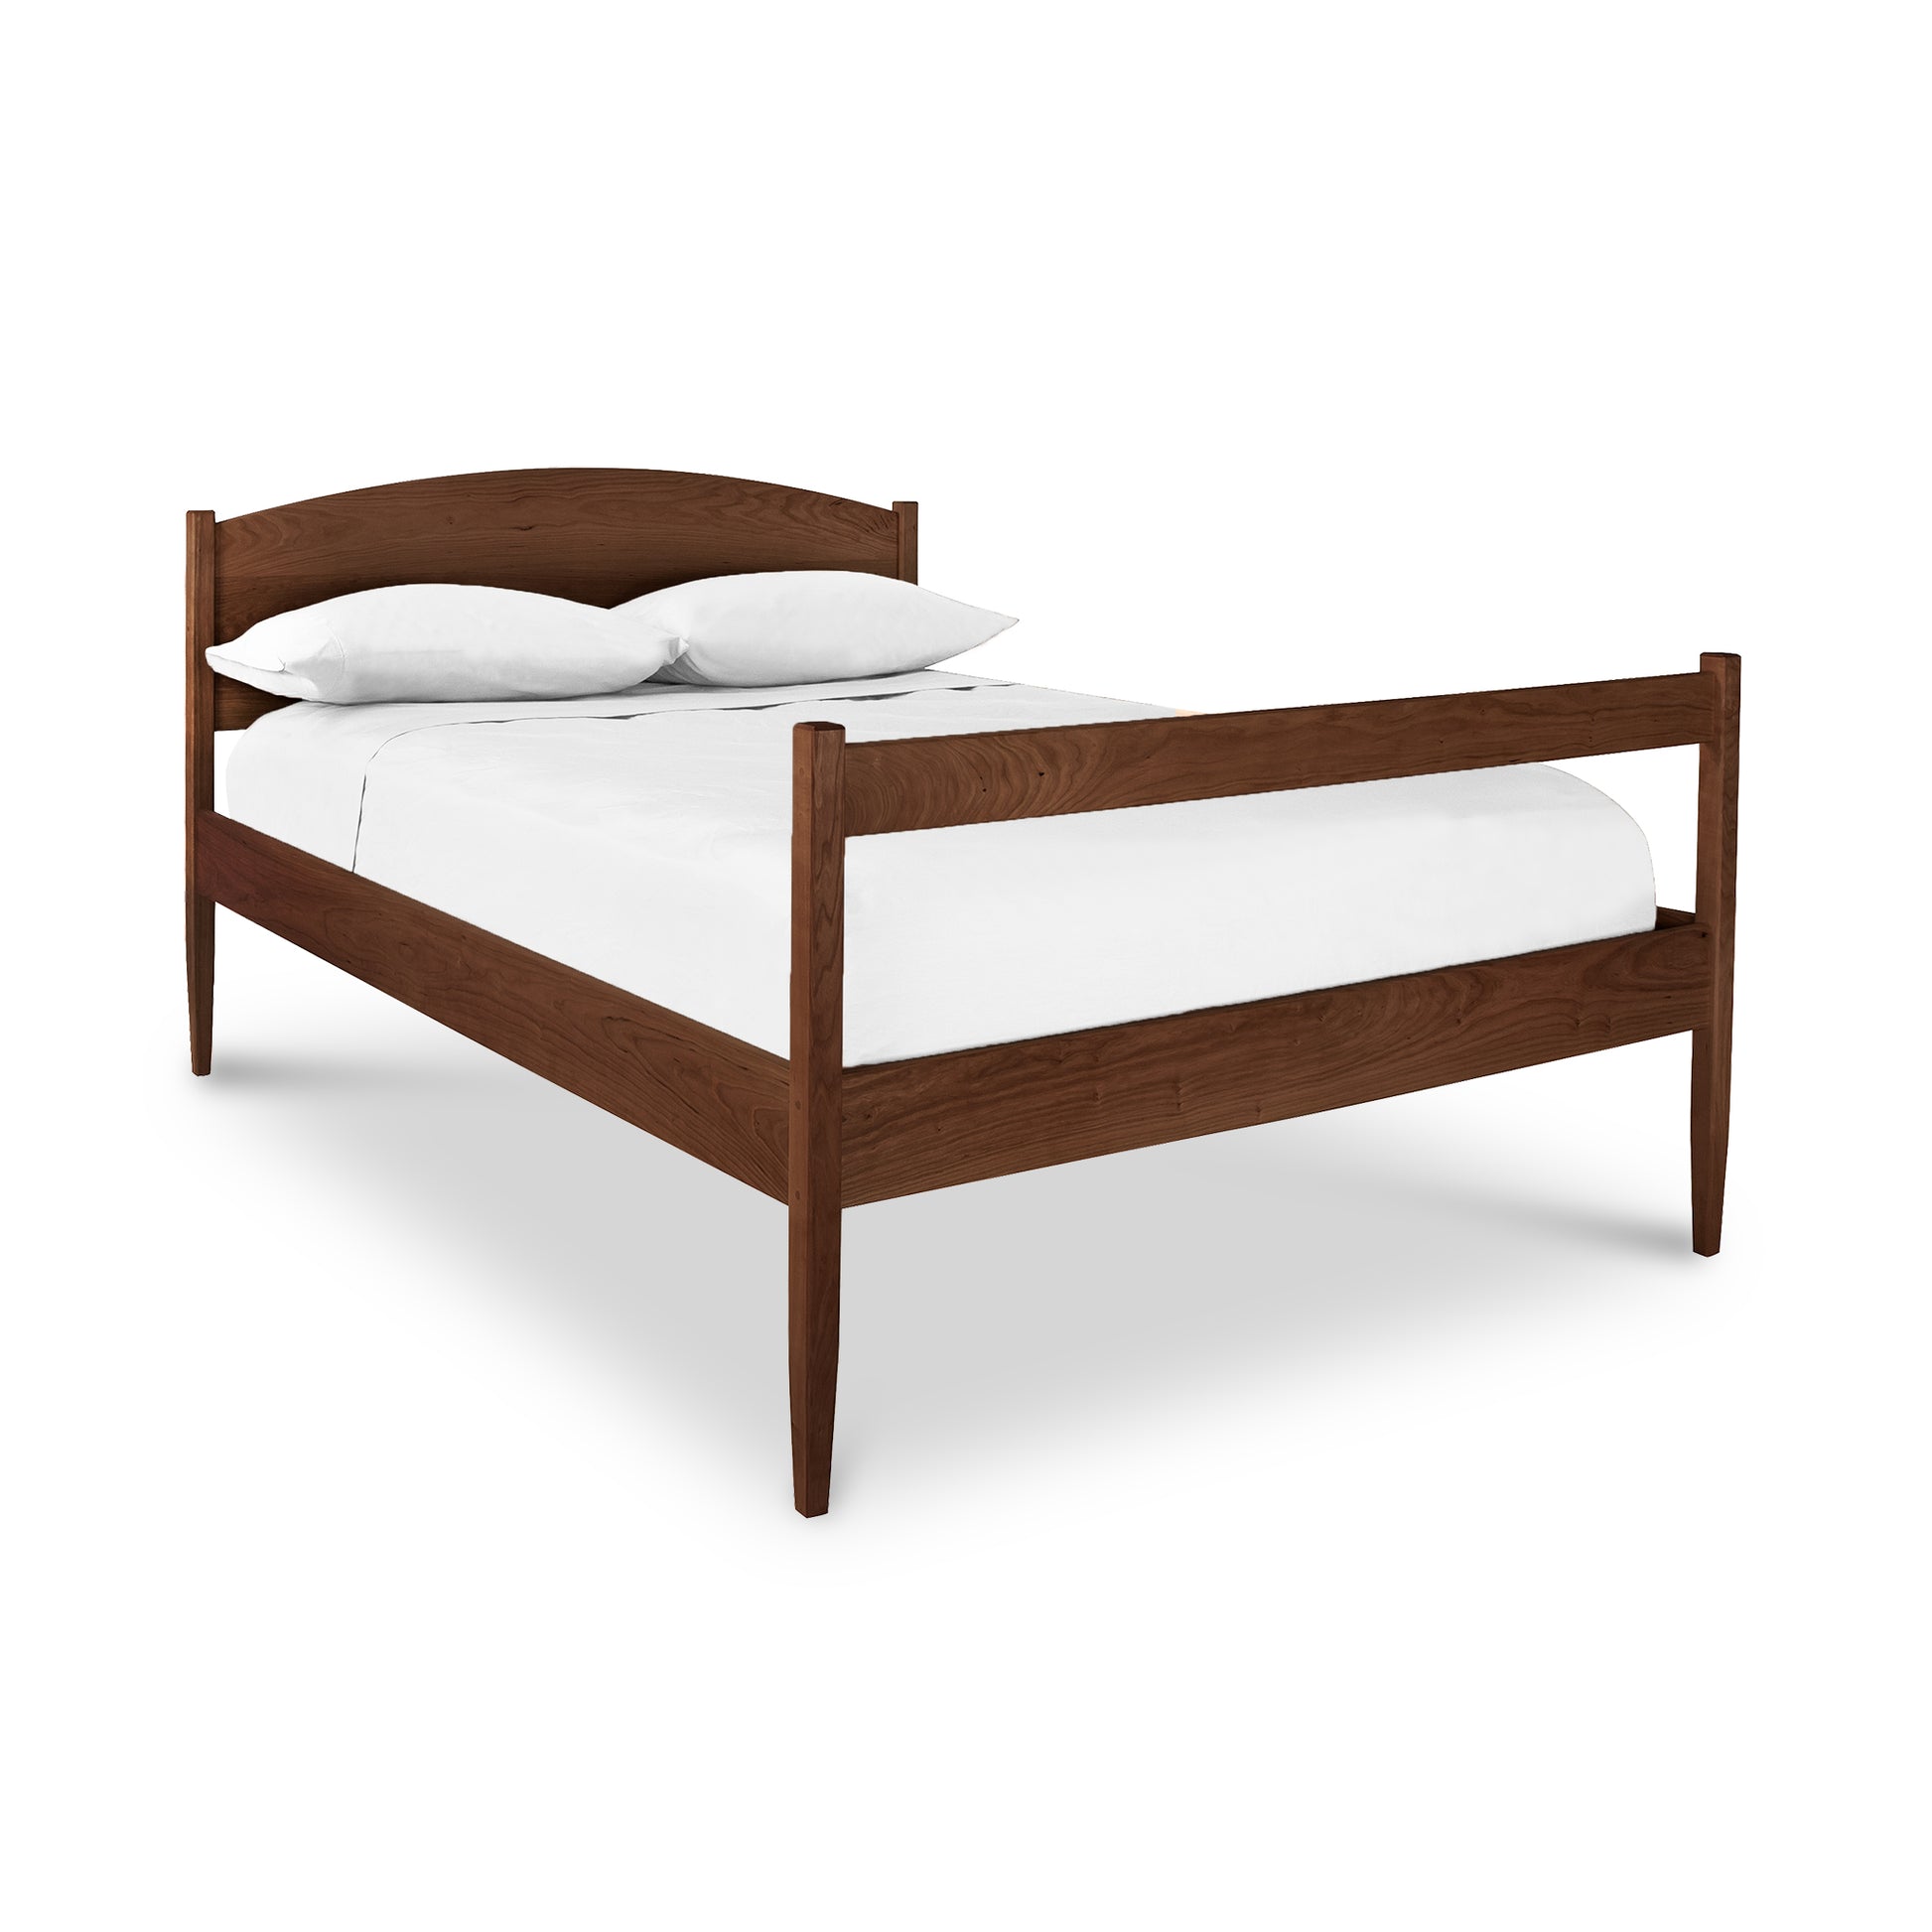 The Maple Corner Woodworks Vermont Shaker Platform Bed is a solid hard wood bed with a wooden frame and white sheets. Handmade by Vermont furniture makers, this bed exudes elegance and craftsmanship.